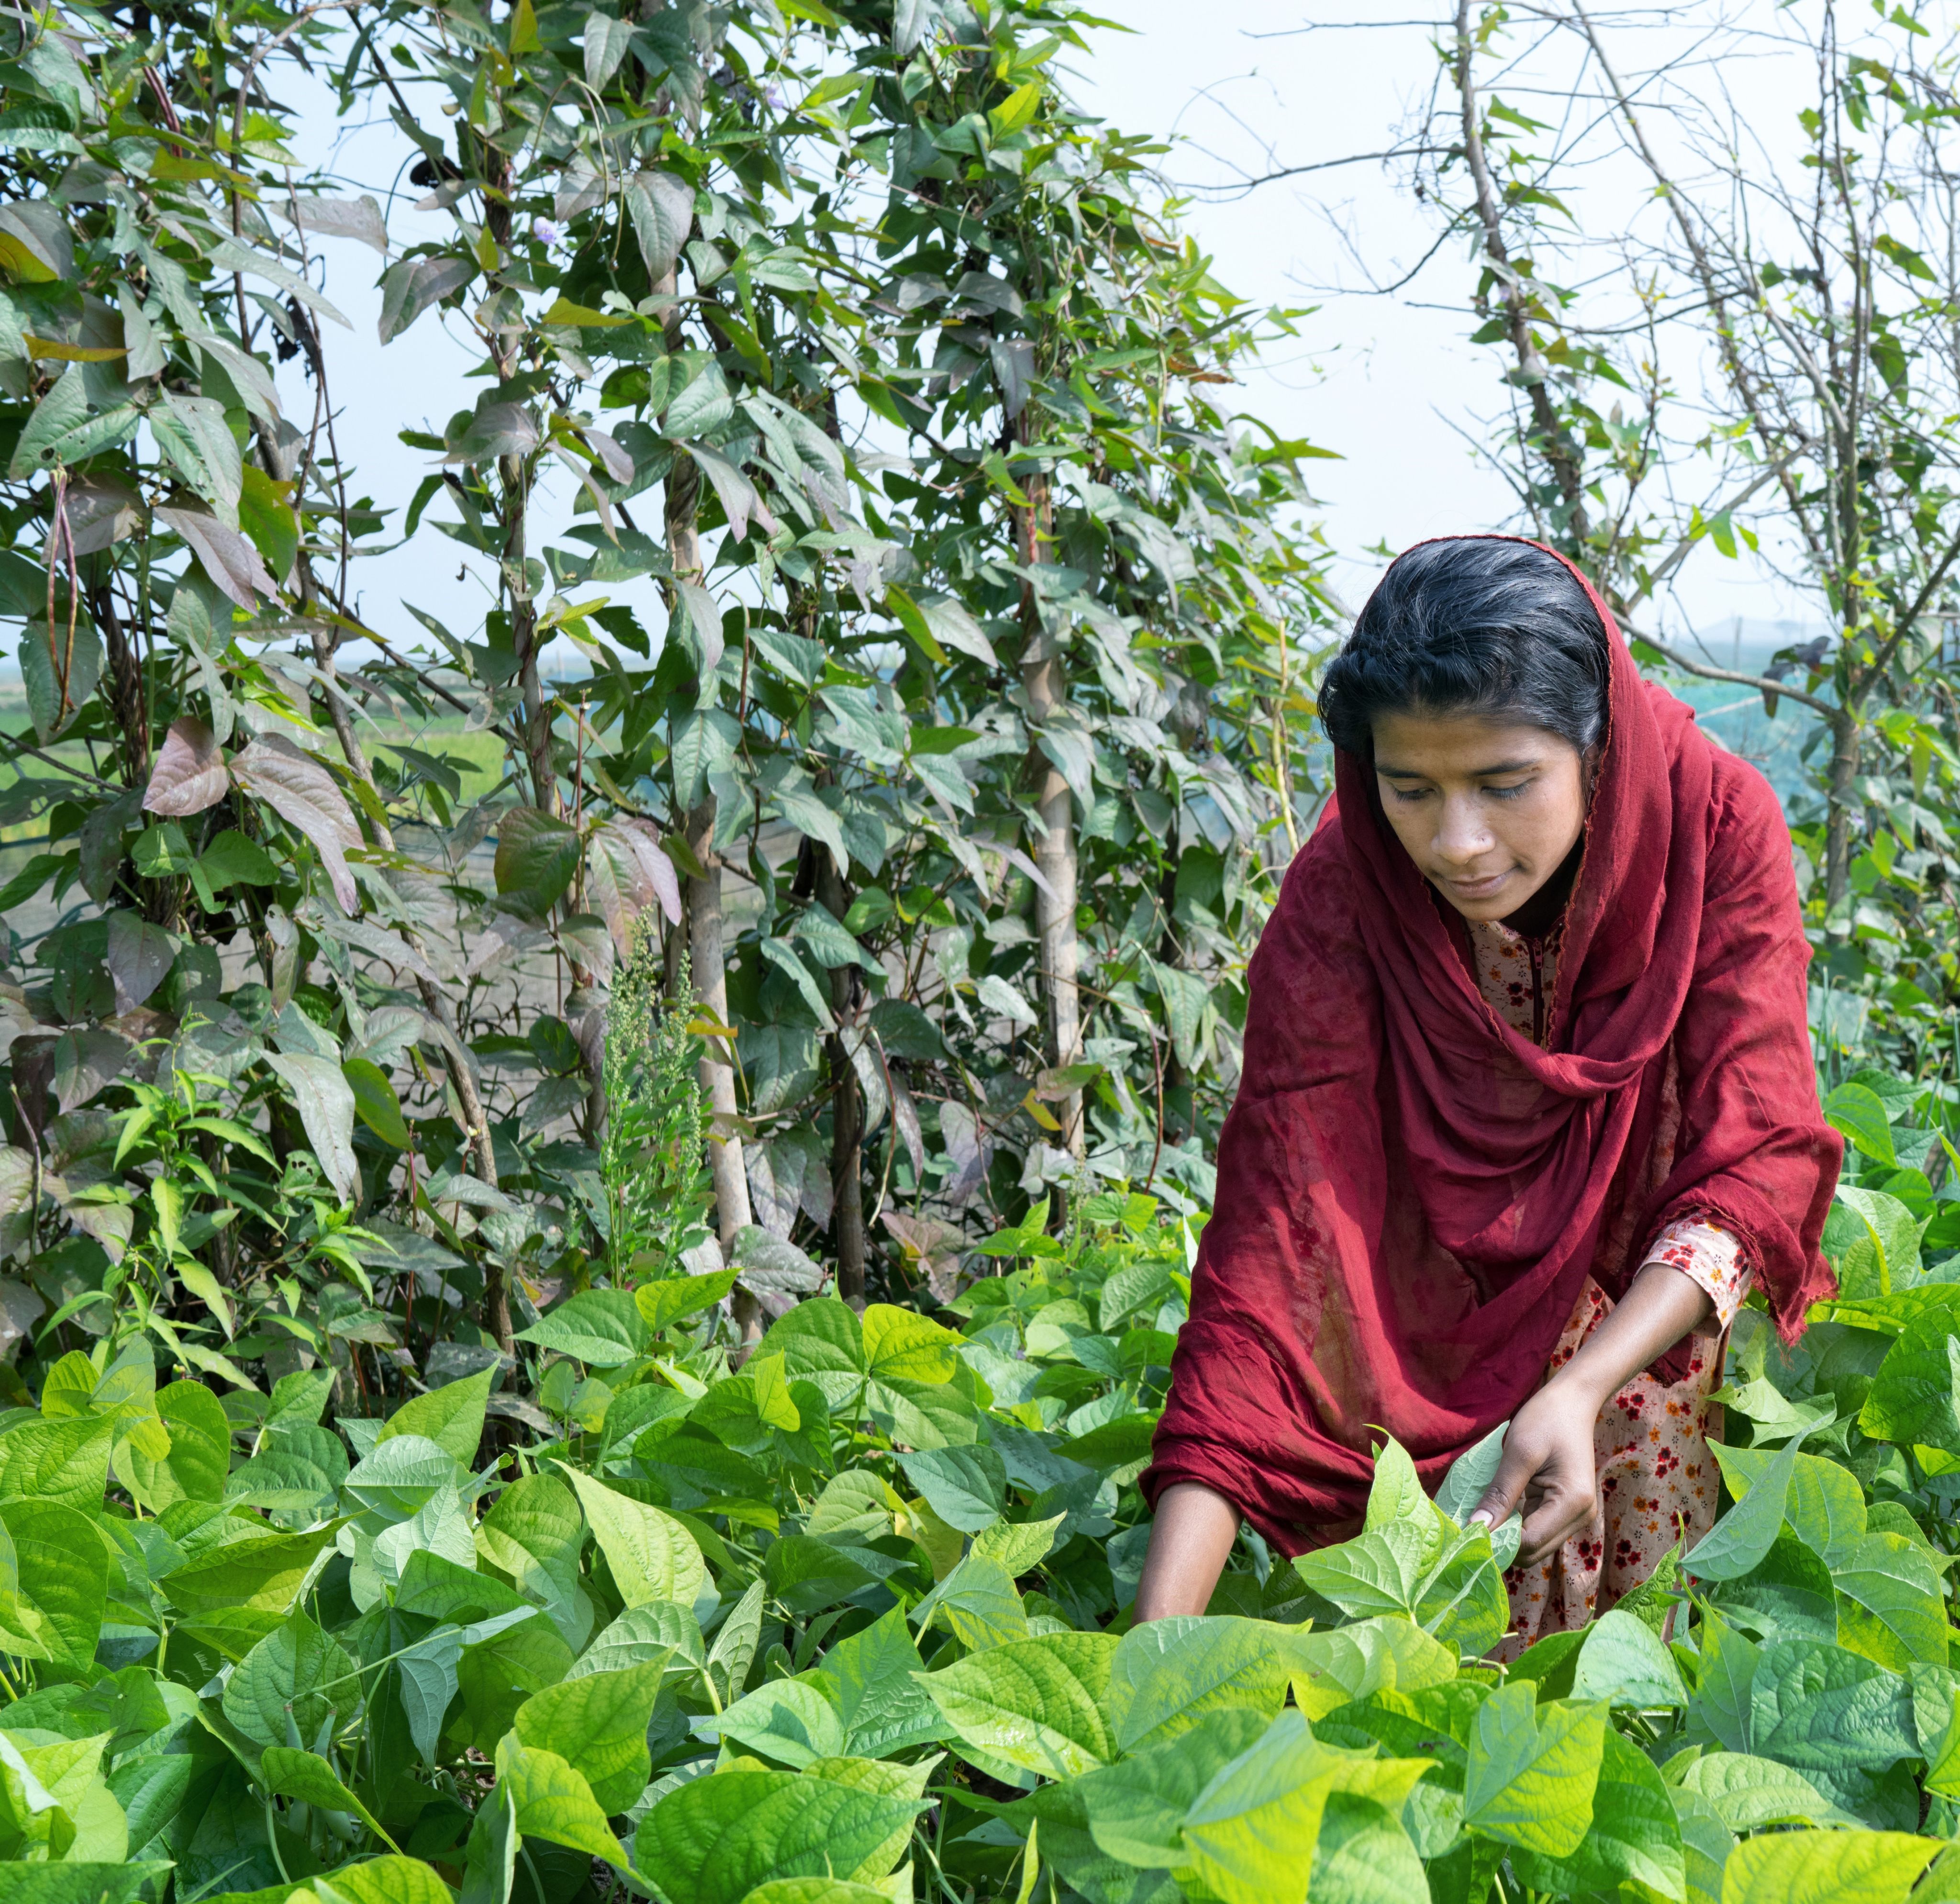 Munni, 18, tends to her home garden which she grew with support from Suchana in Sylhet, Bangladesh.